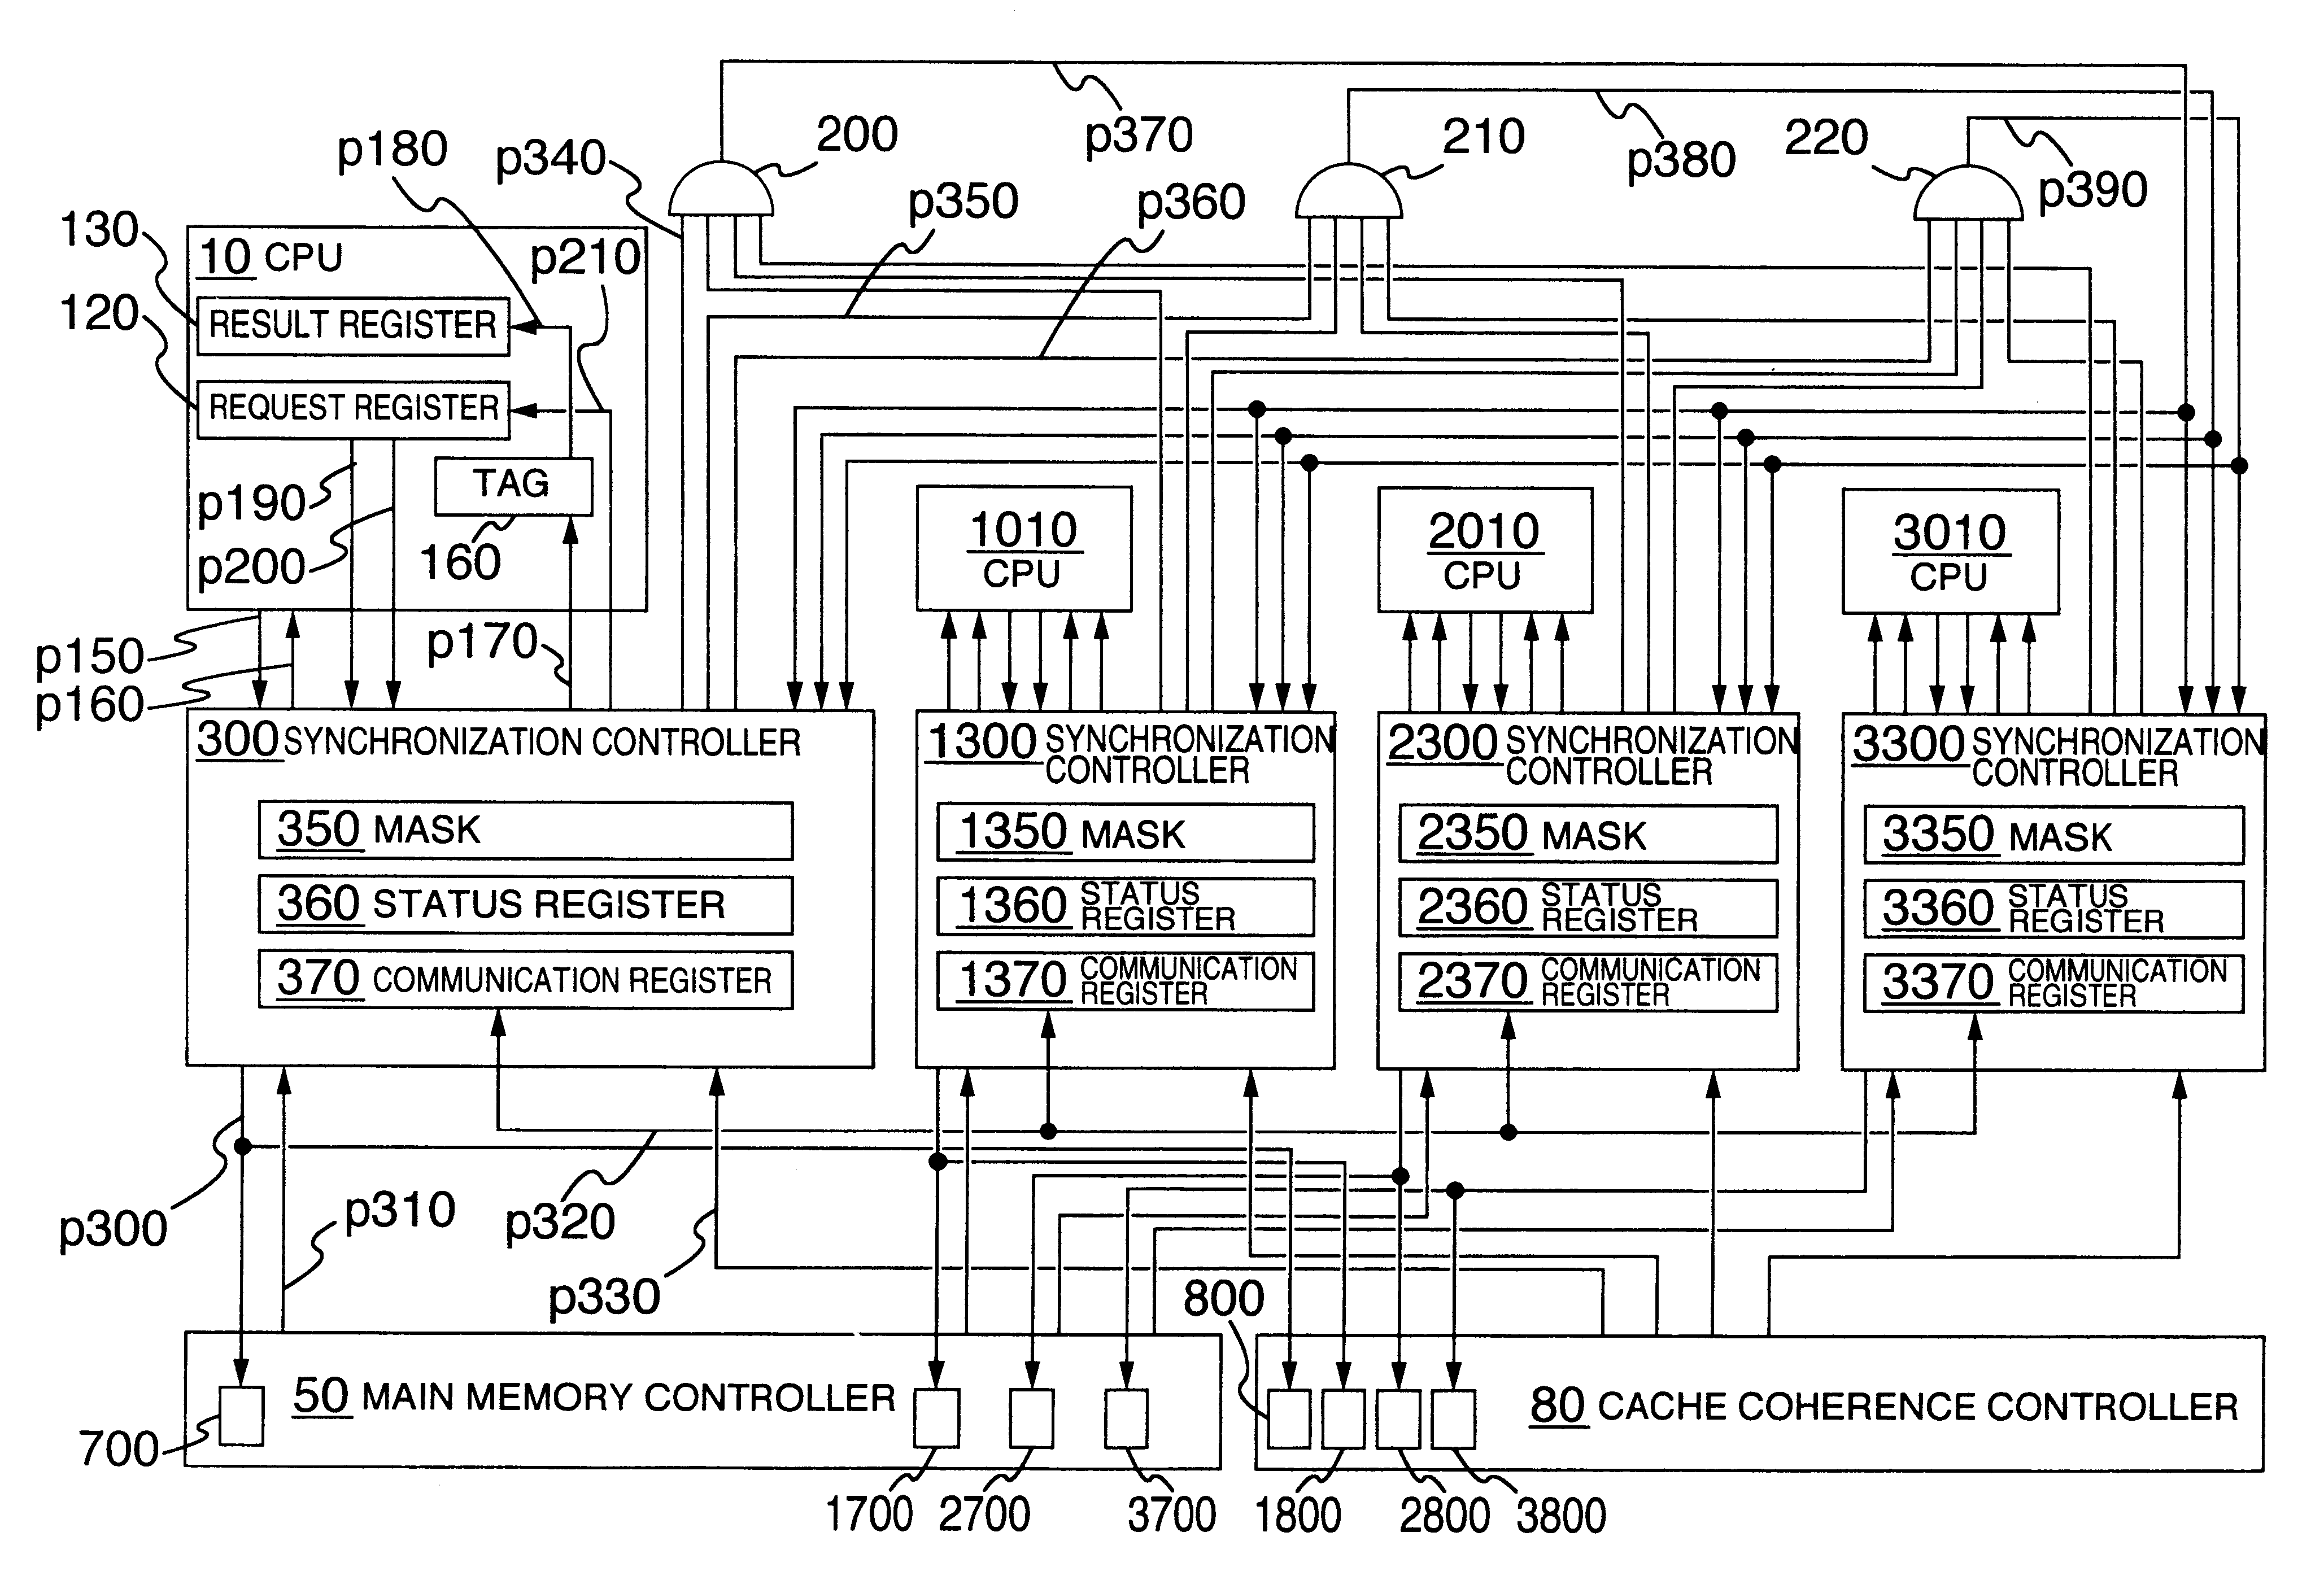 Multiprocessor synchronization and coherency control system